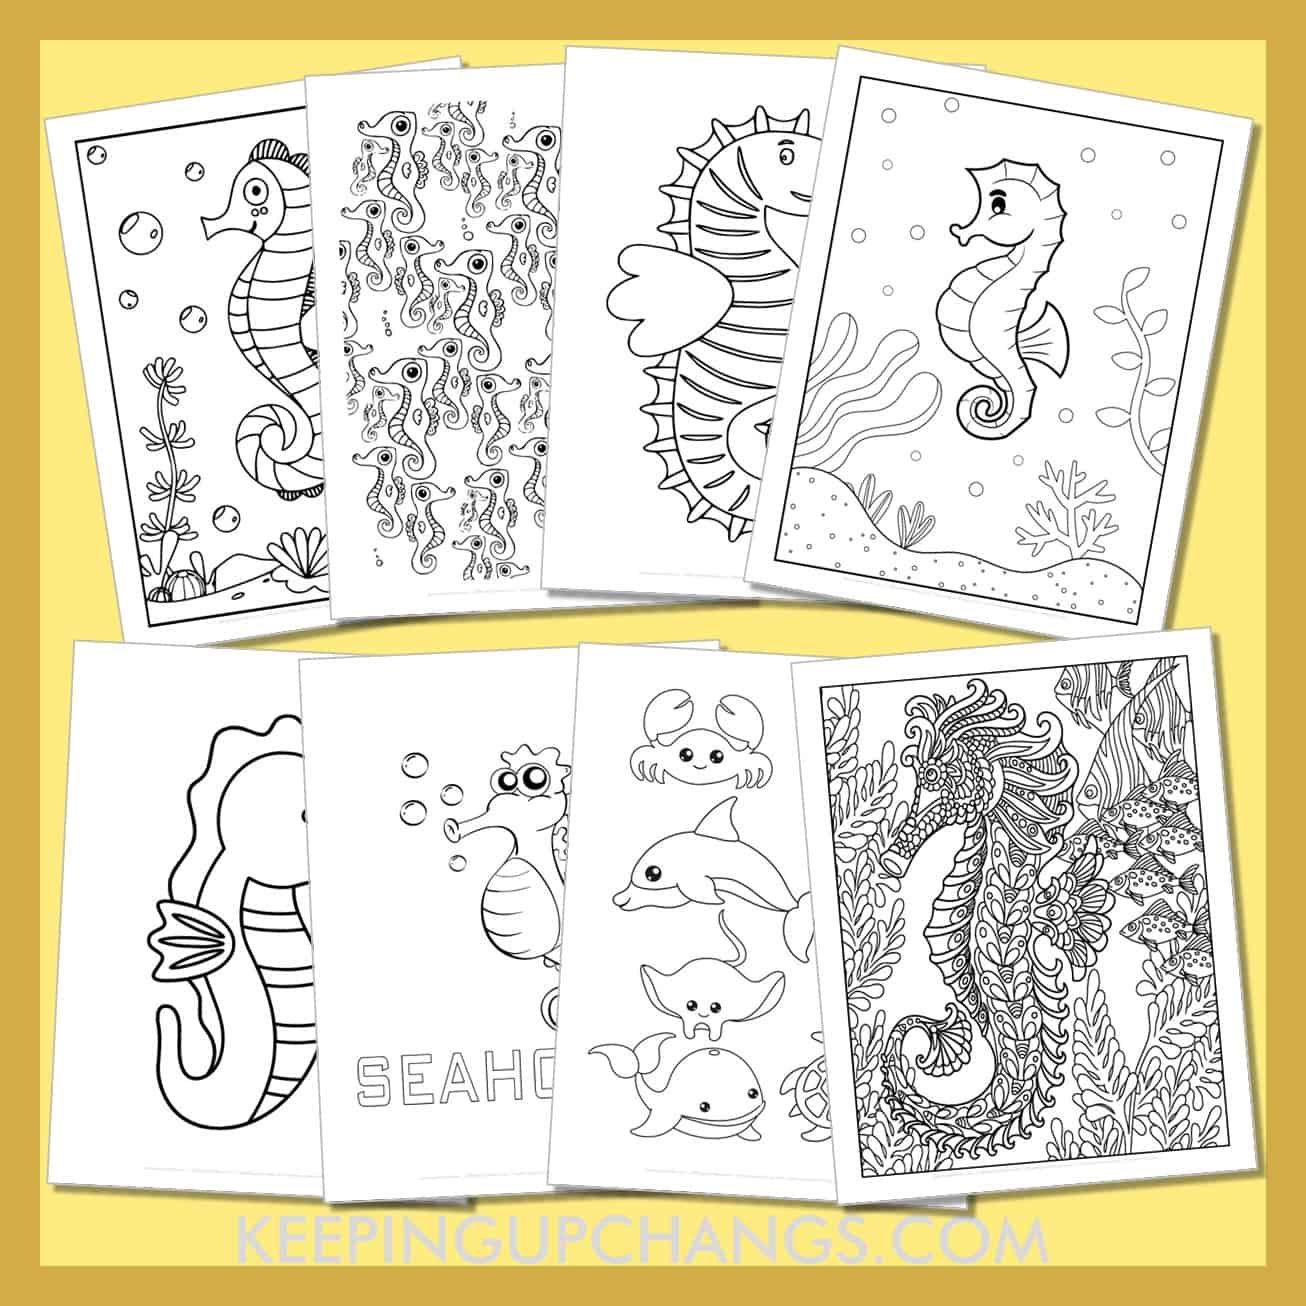 free seahorse pictures to color for toddlers, kids, adults.